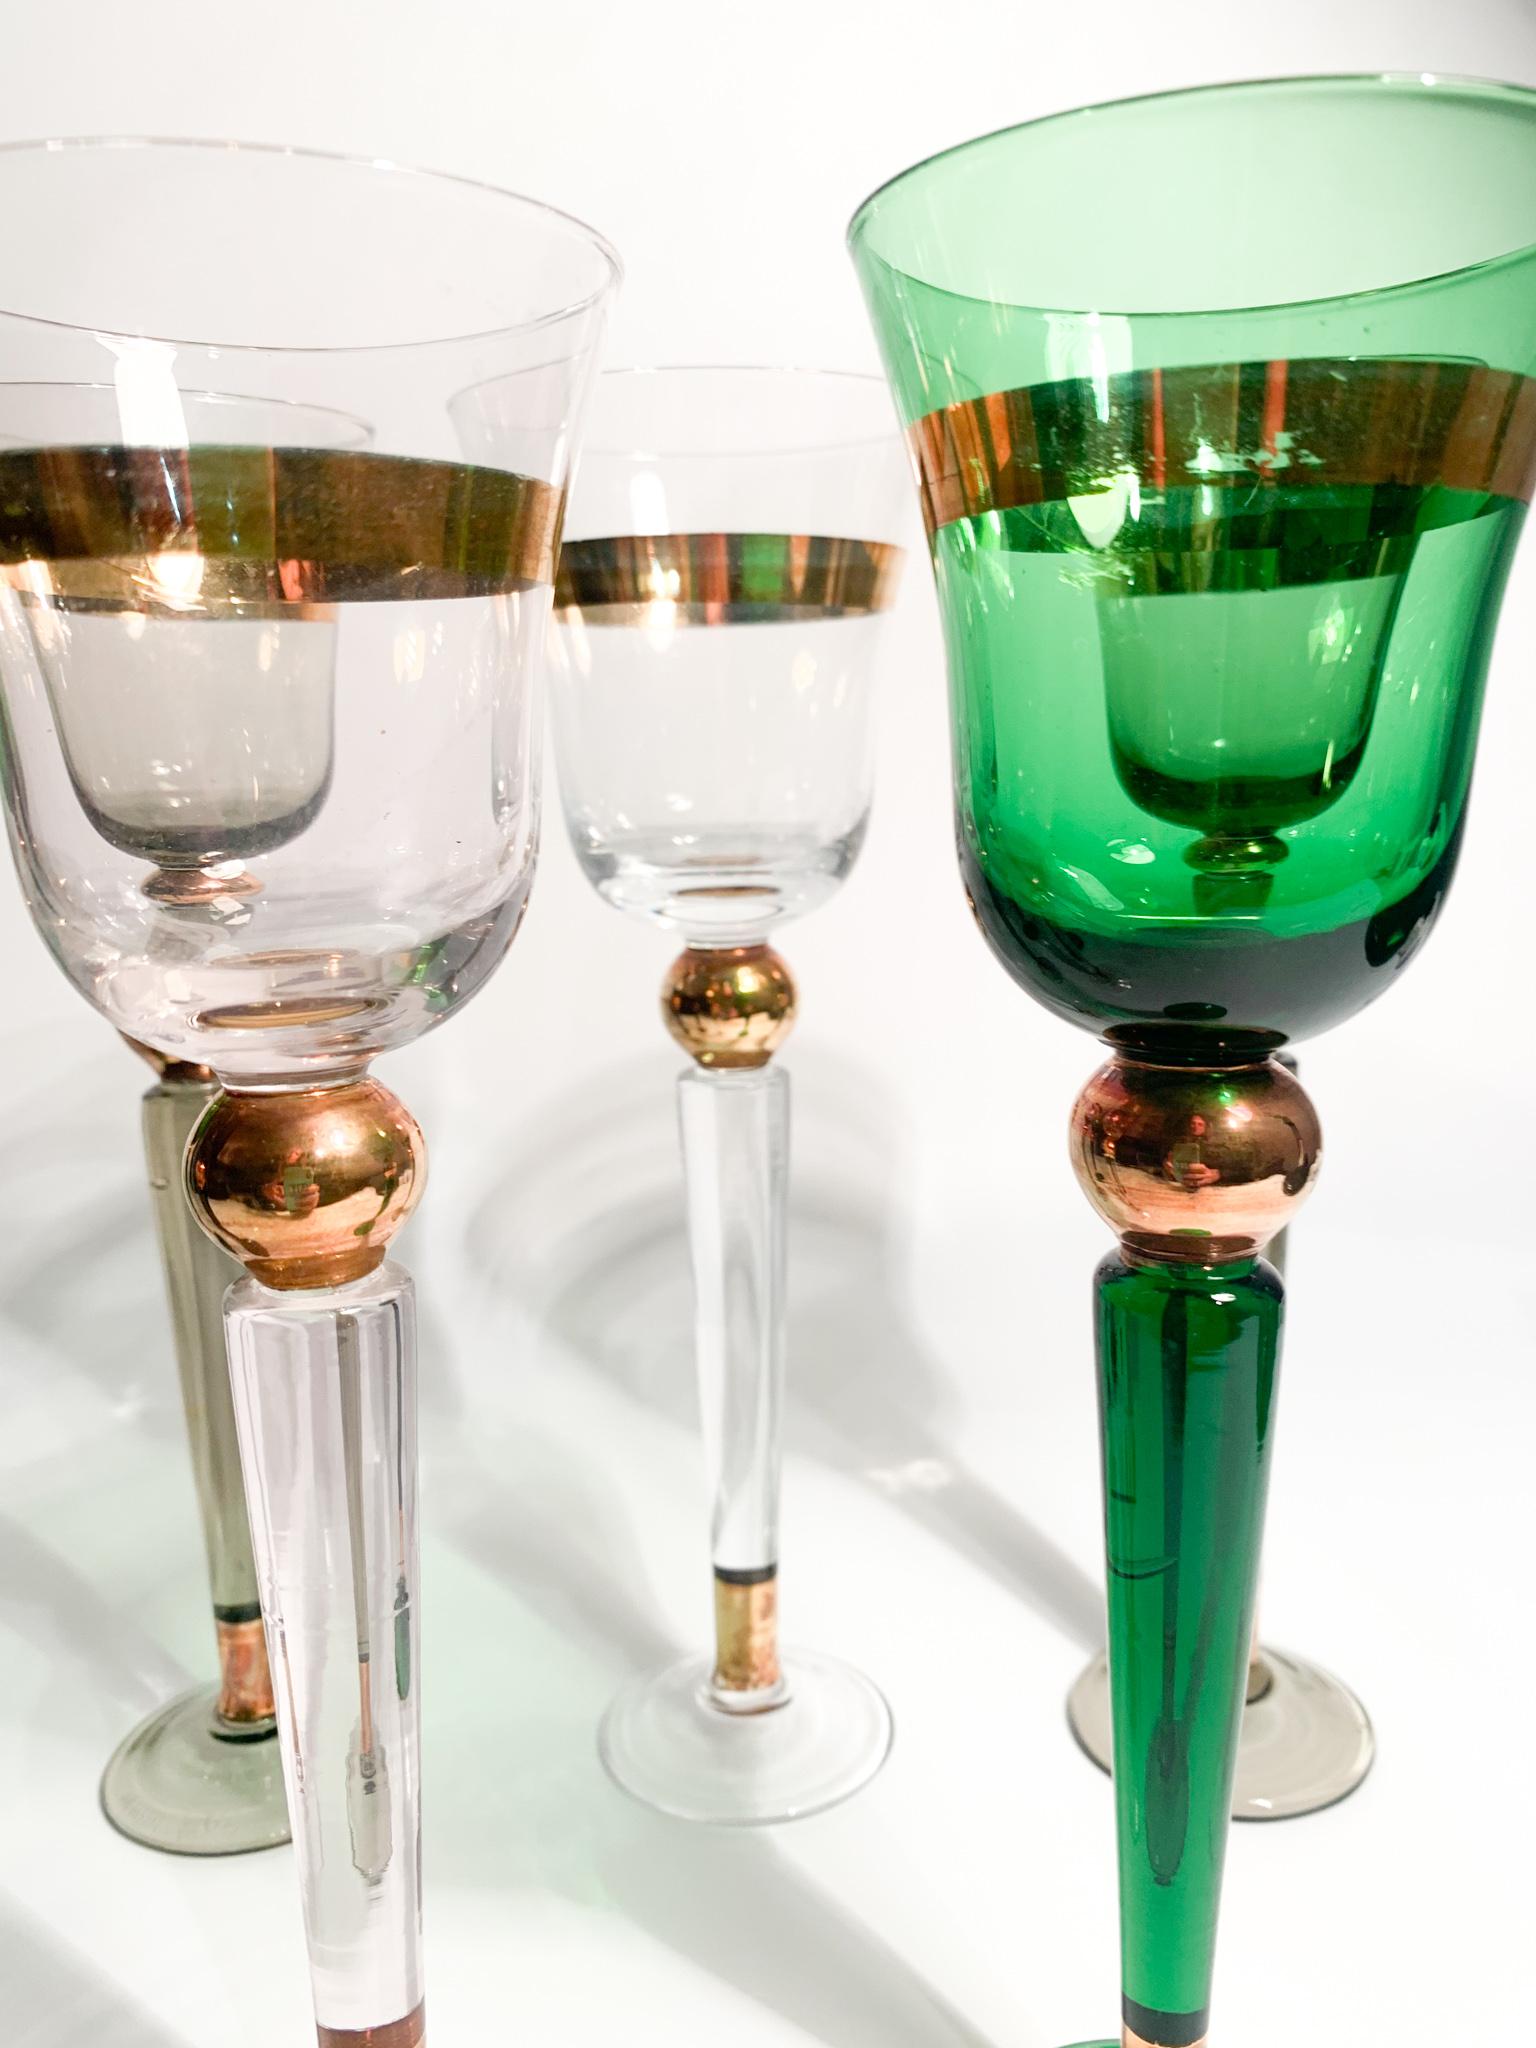 Mid-20th Century Set of 6 Venini Multicolored Murano Glass Goblets from the 1950s For Sale